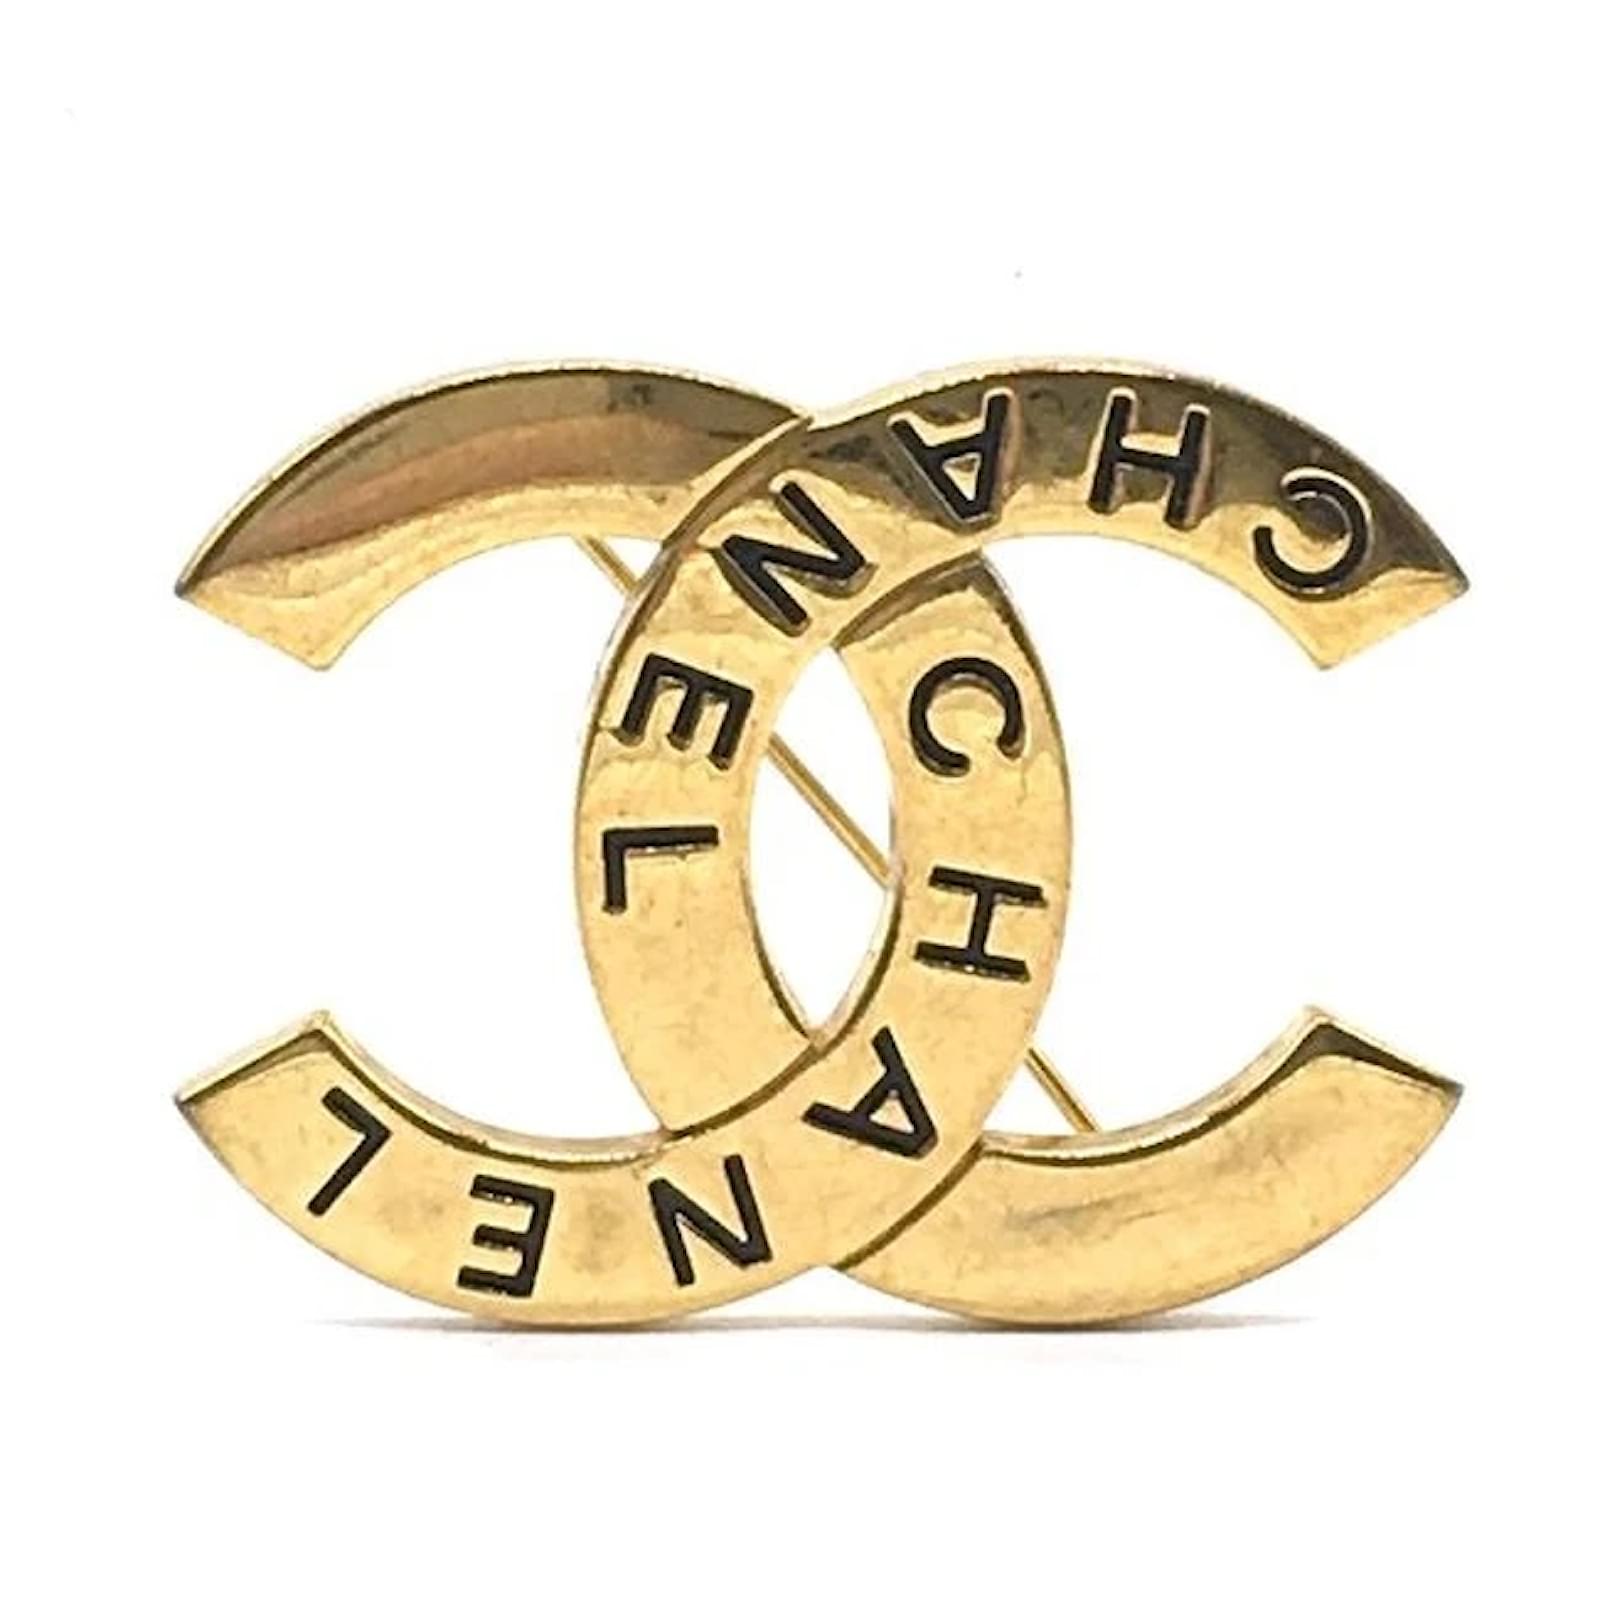 Authentic Chanel Brooch - How to style a brooch in 10 different